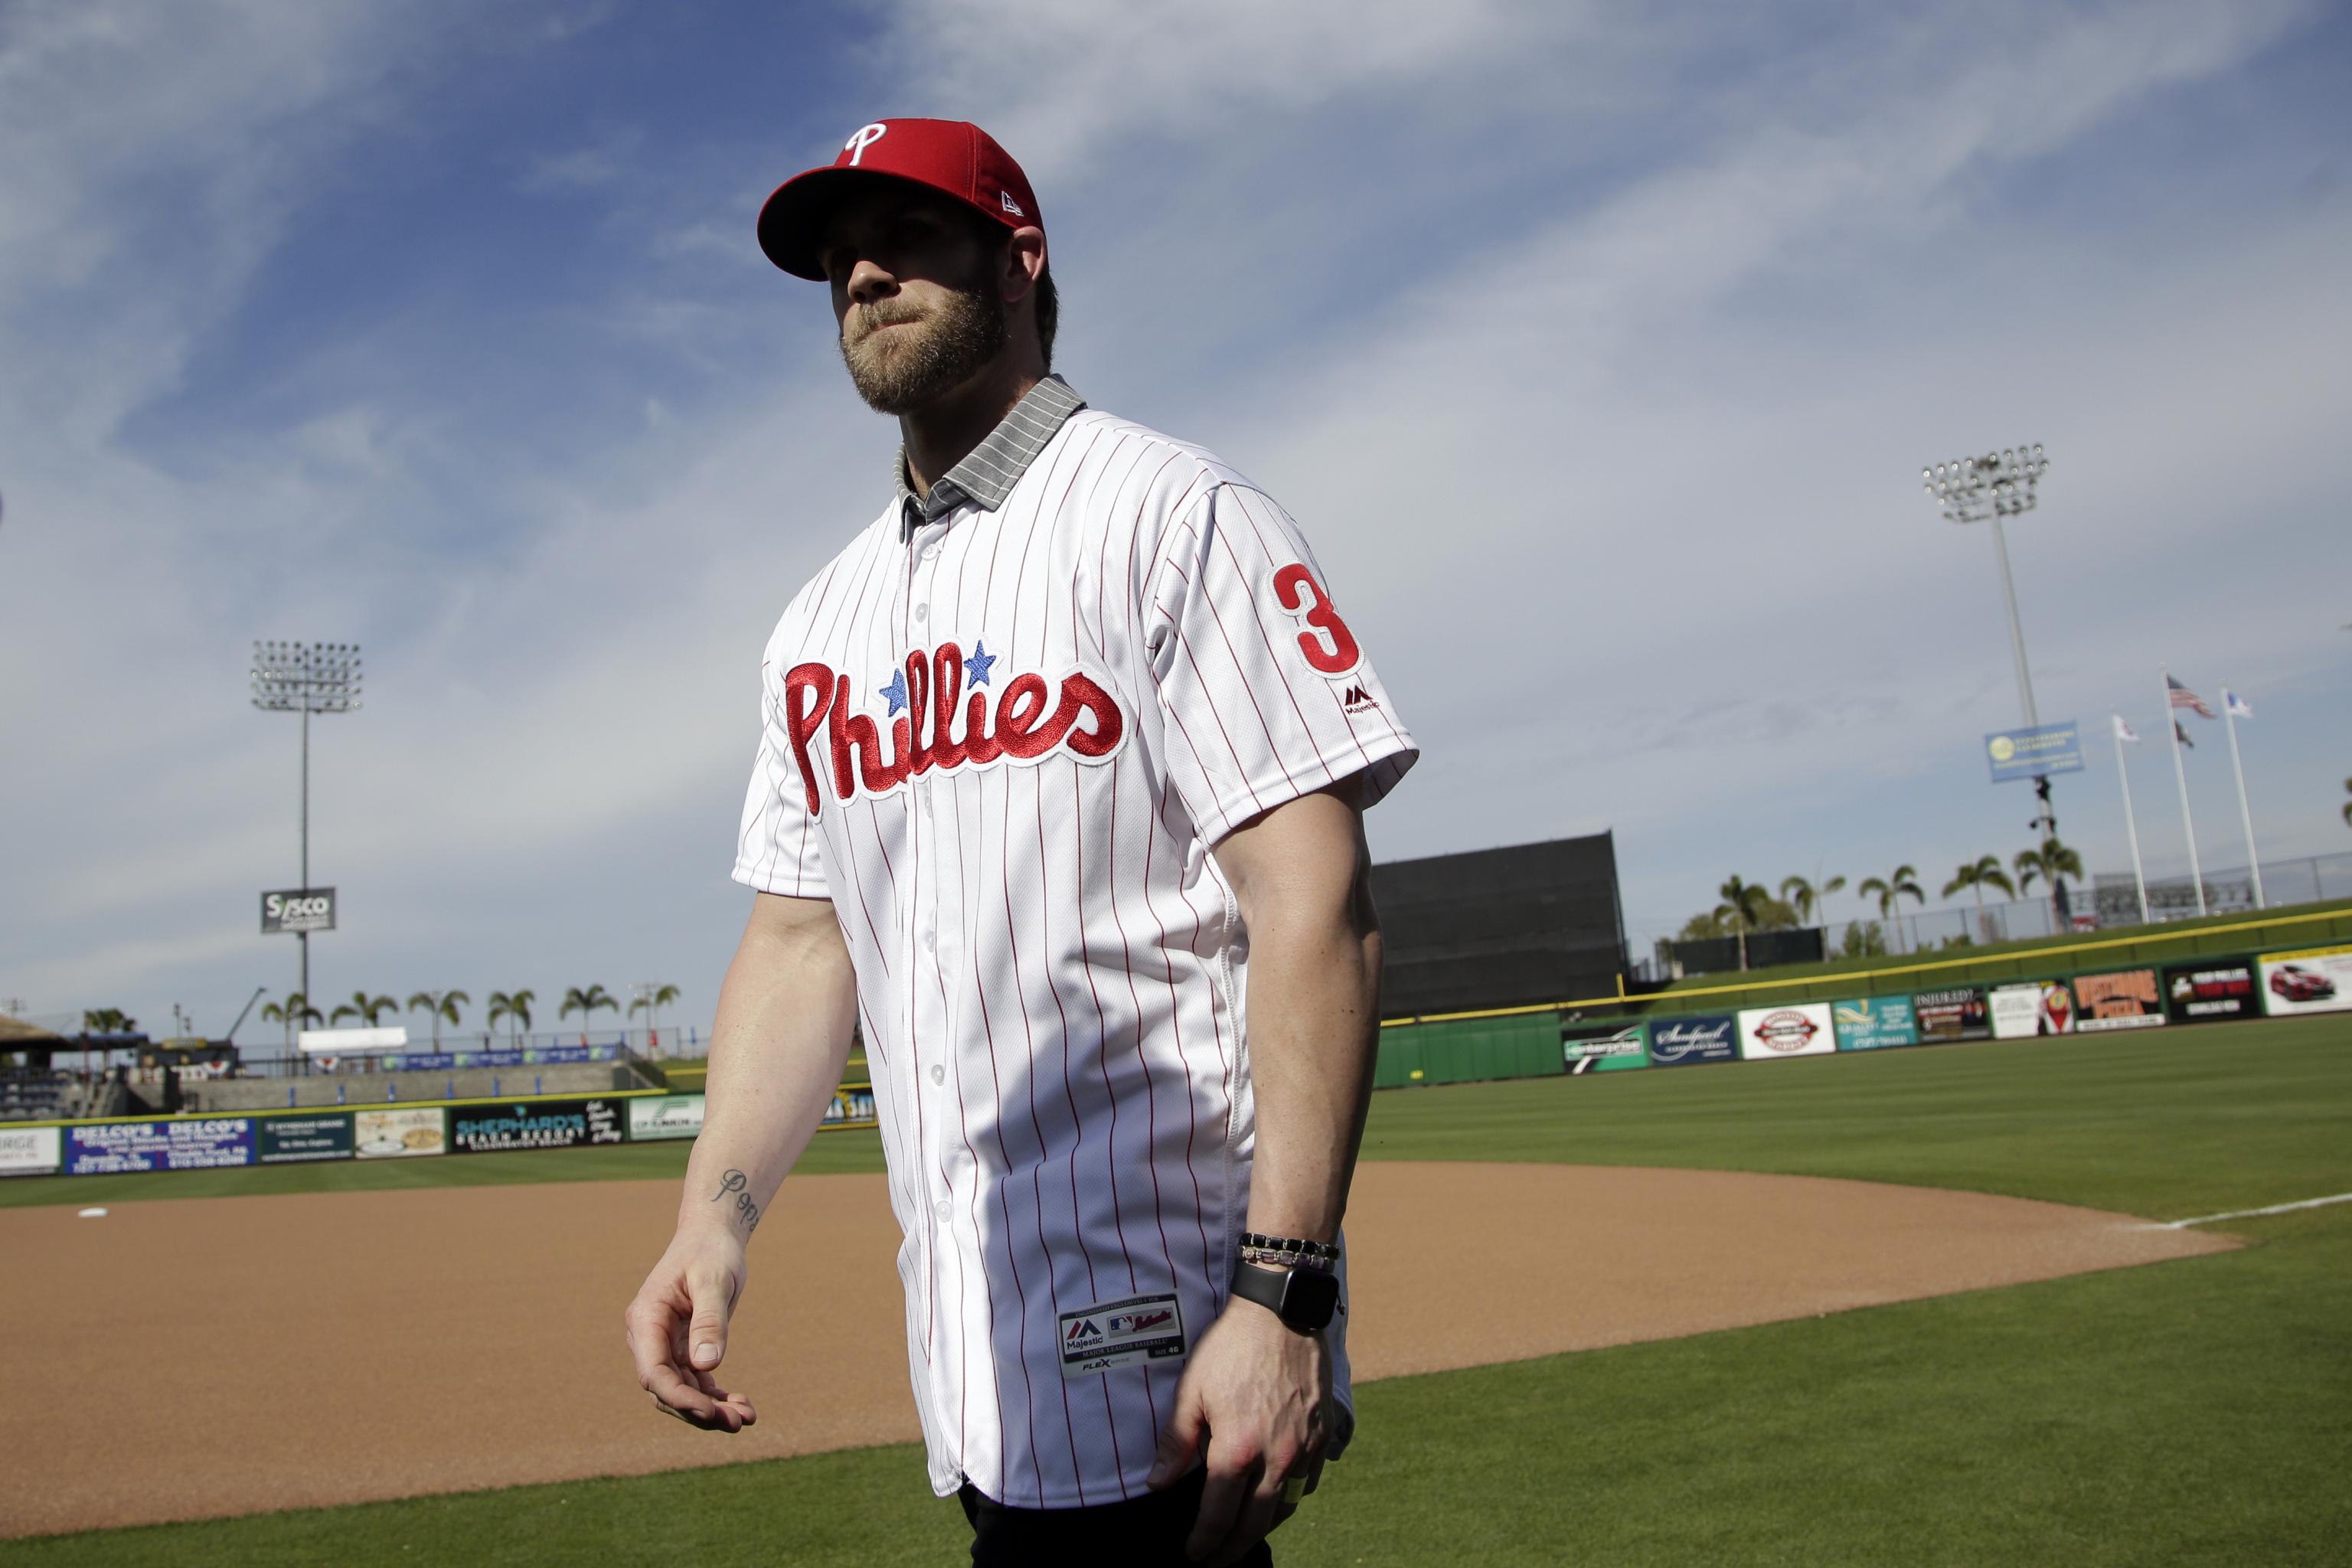 Bryce Harper's Phillies Jersey Sets Sales Record Within 24 Hours of